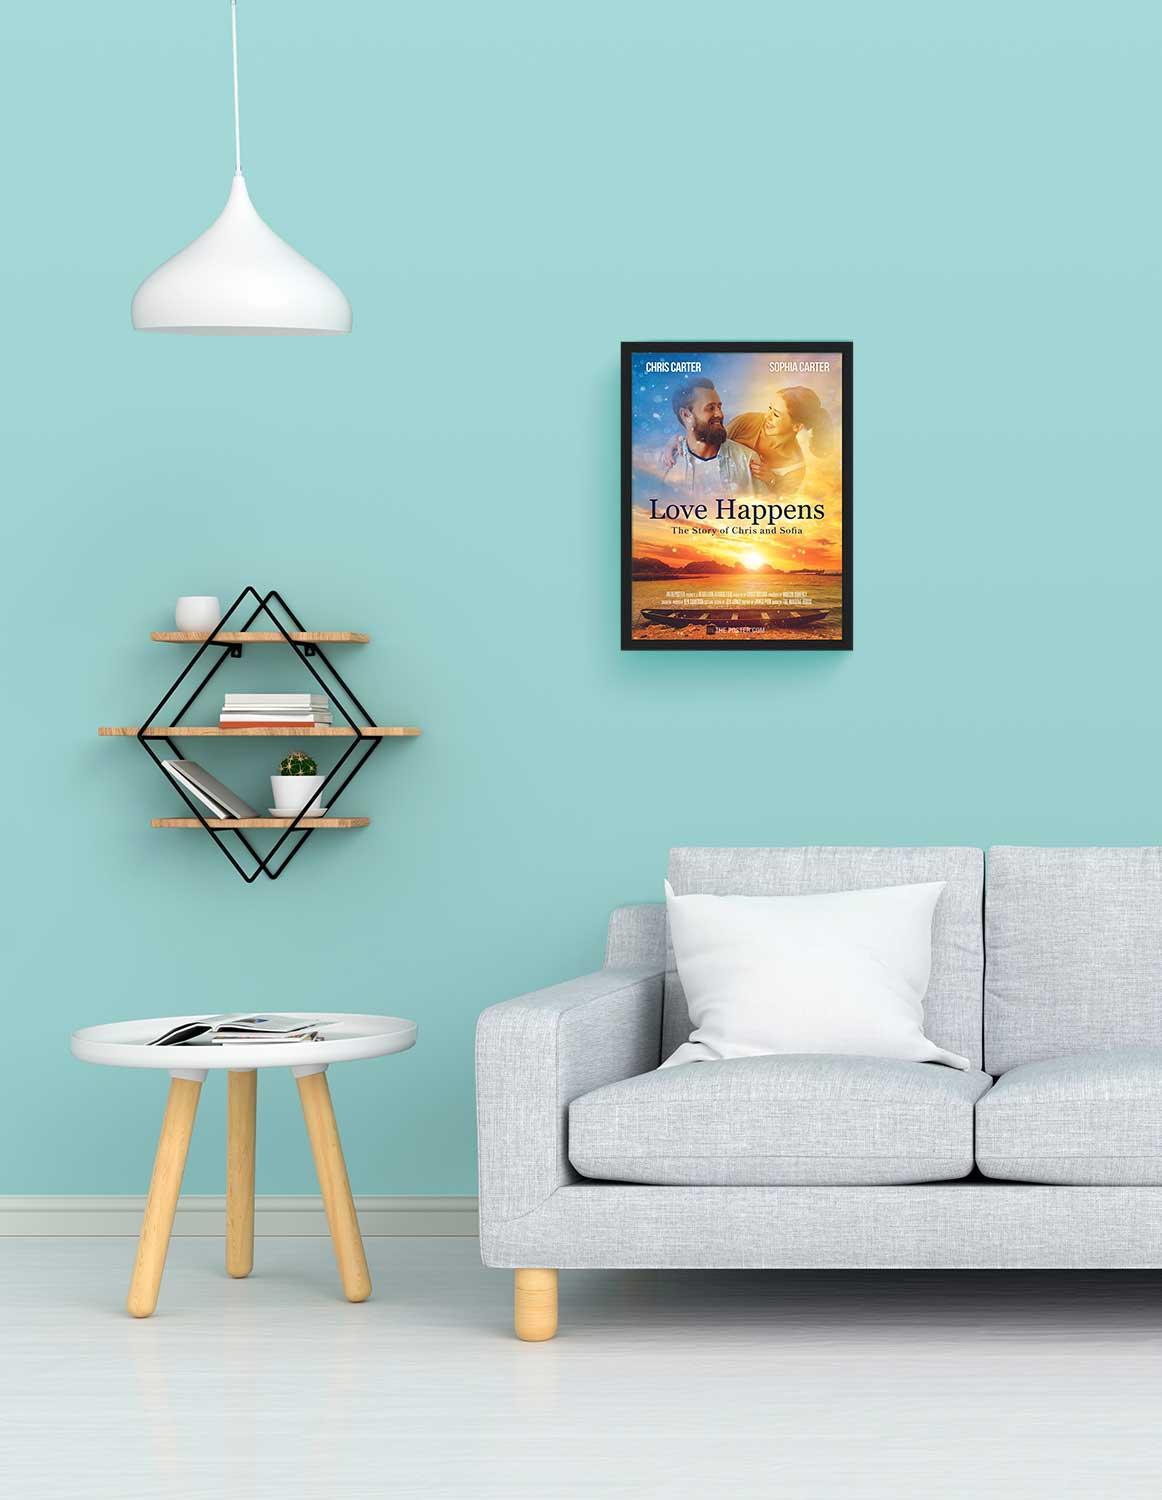 A romantic movie poster in a small size black frame above a grey sofa